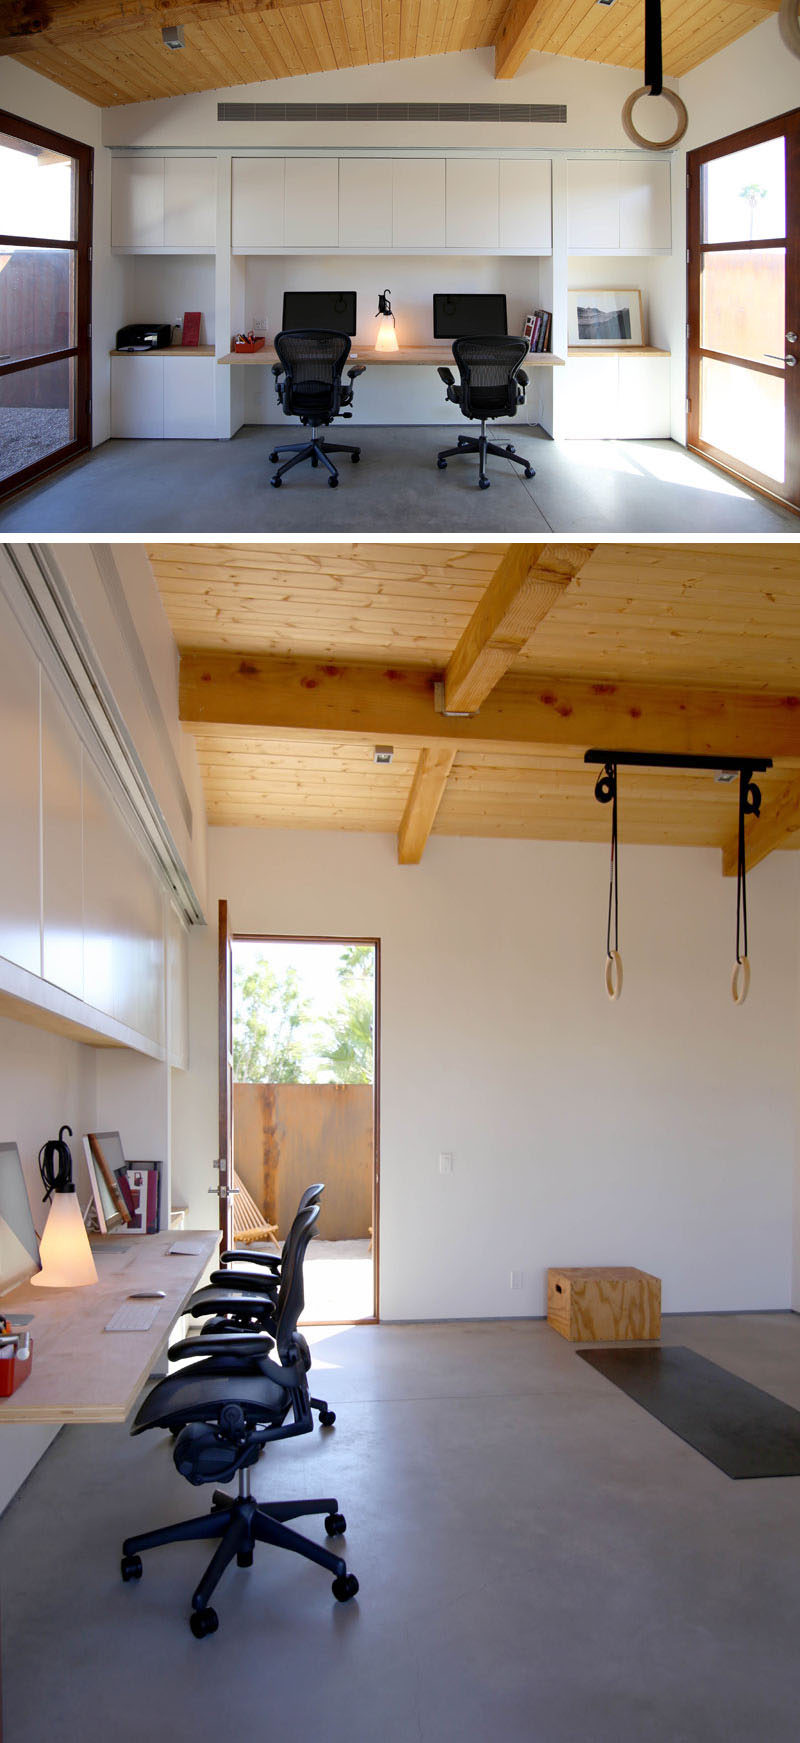 This studio / home office also doubles as a gym and opens up to a patio and courtyard. #HomeOffice #gym #studio #WoodFramedDoors